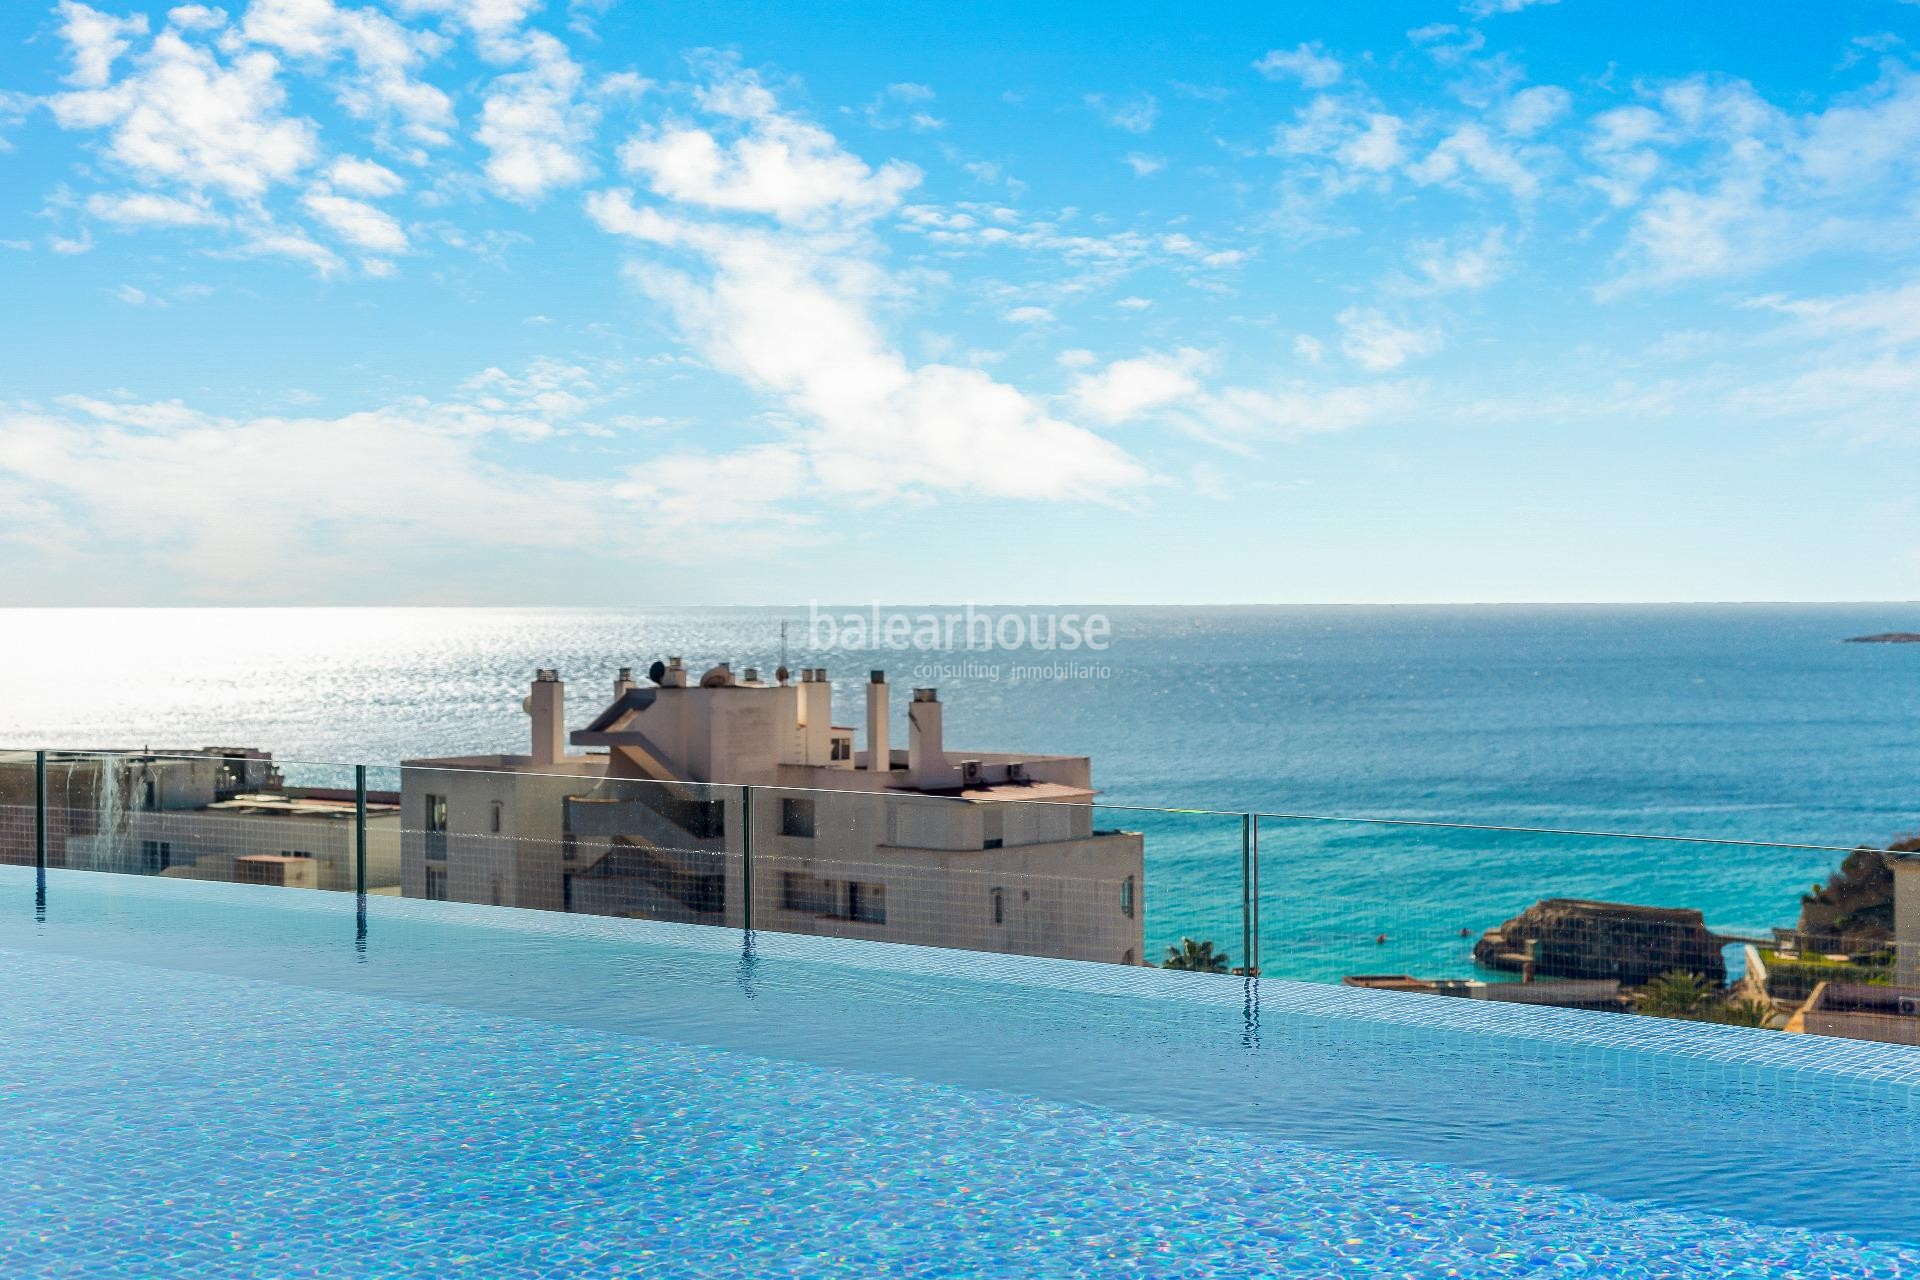 Spectacular new build penthouse with private pool and beautiful sea views near the beach